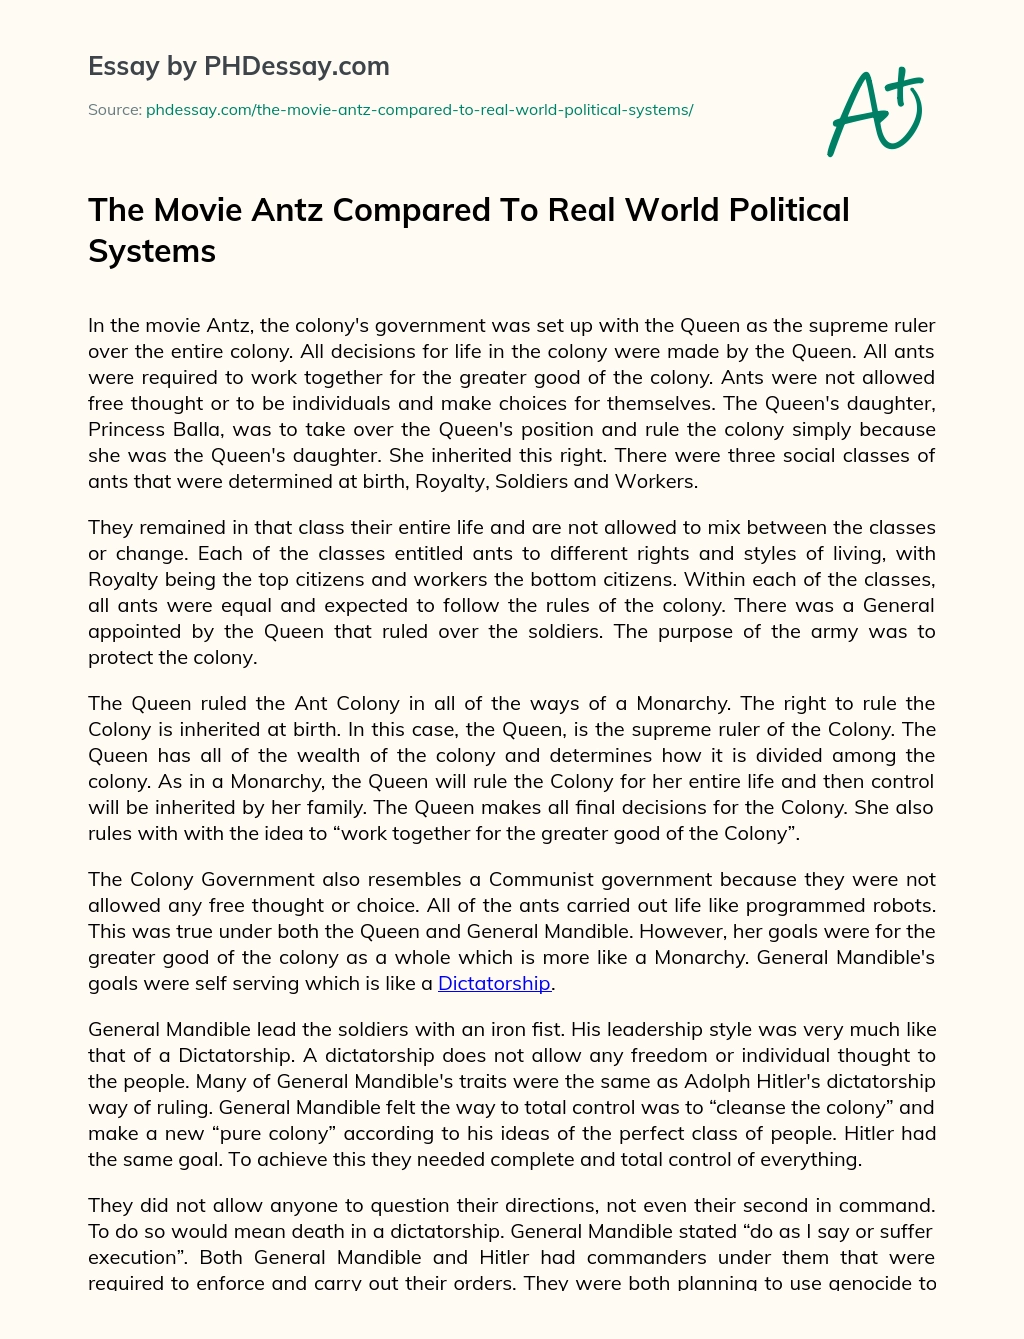 The Movie Antz Compared To Real World Political Systems essay